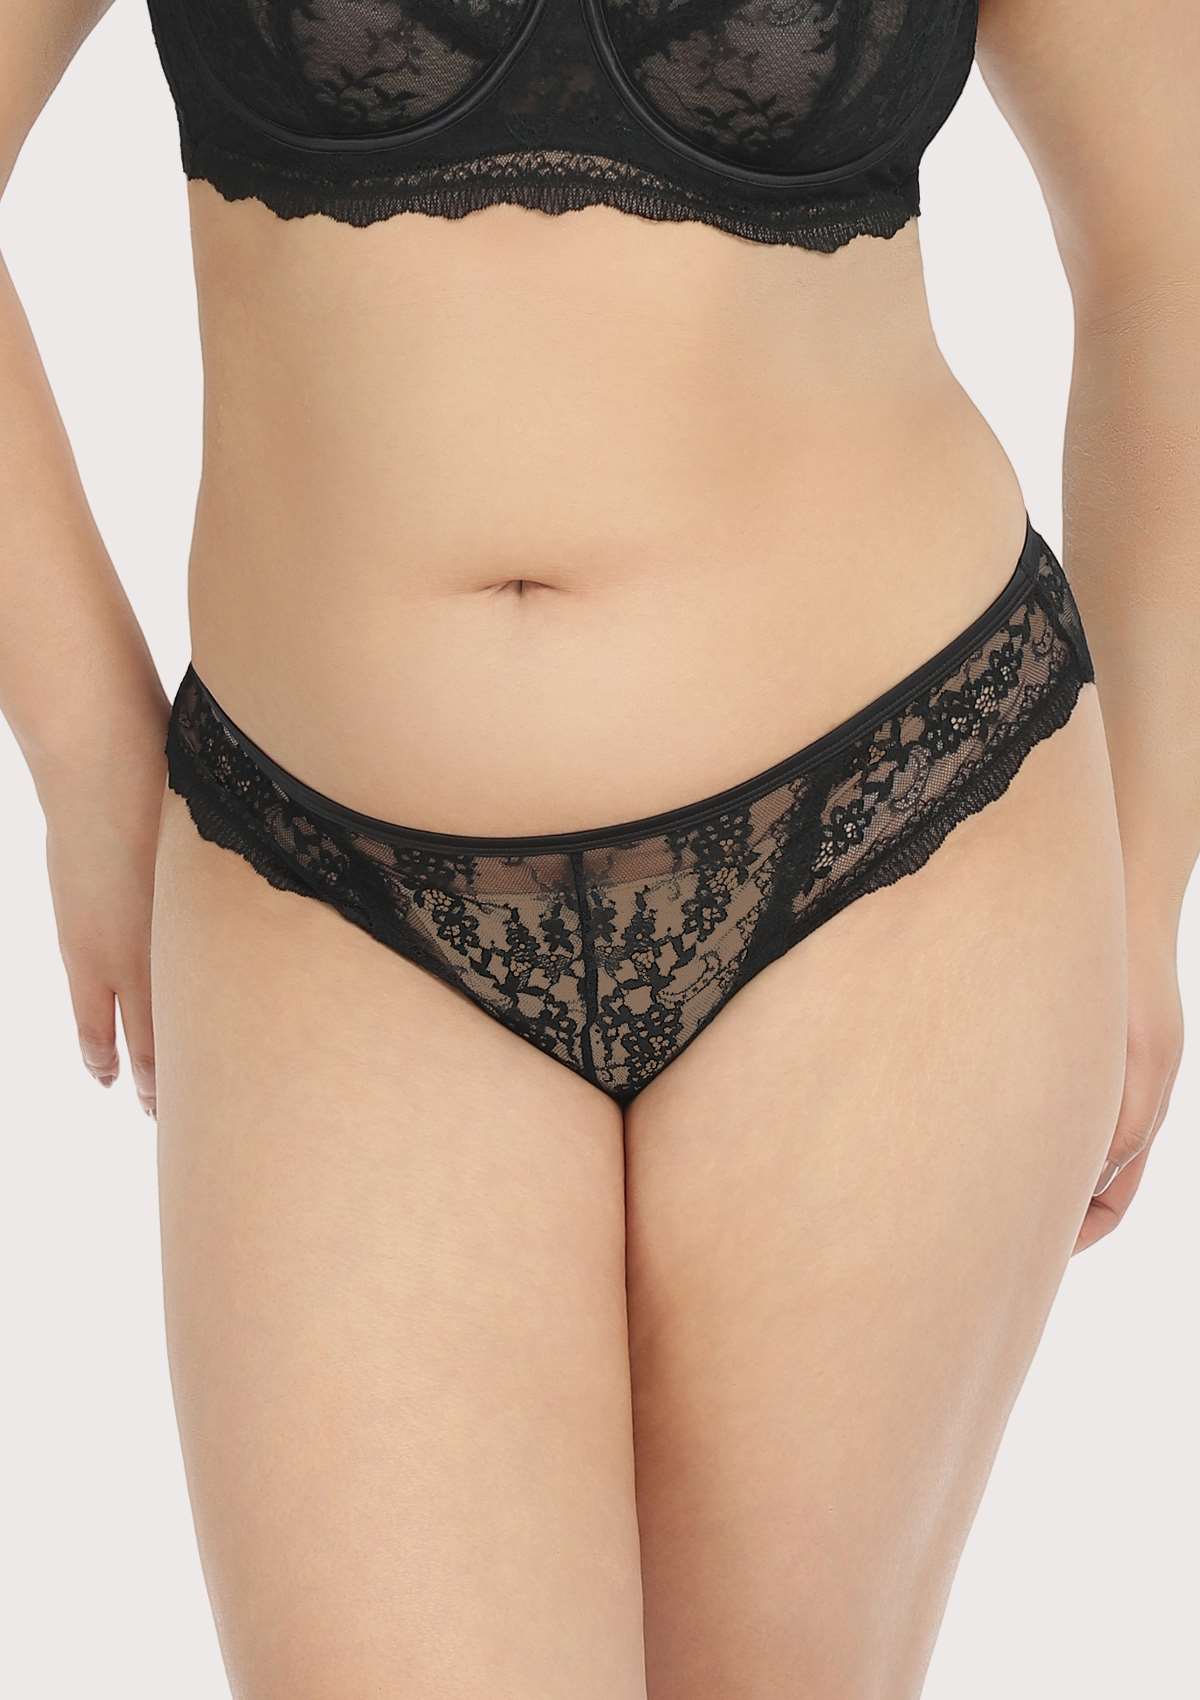 HSIA Floral Lace Bridal Cheeky Underwear: Delicate, Airy, And Comfy - Black / S